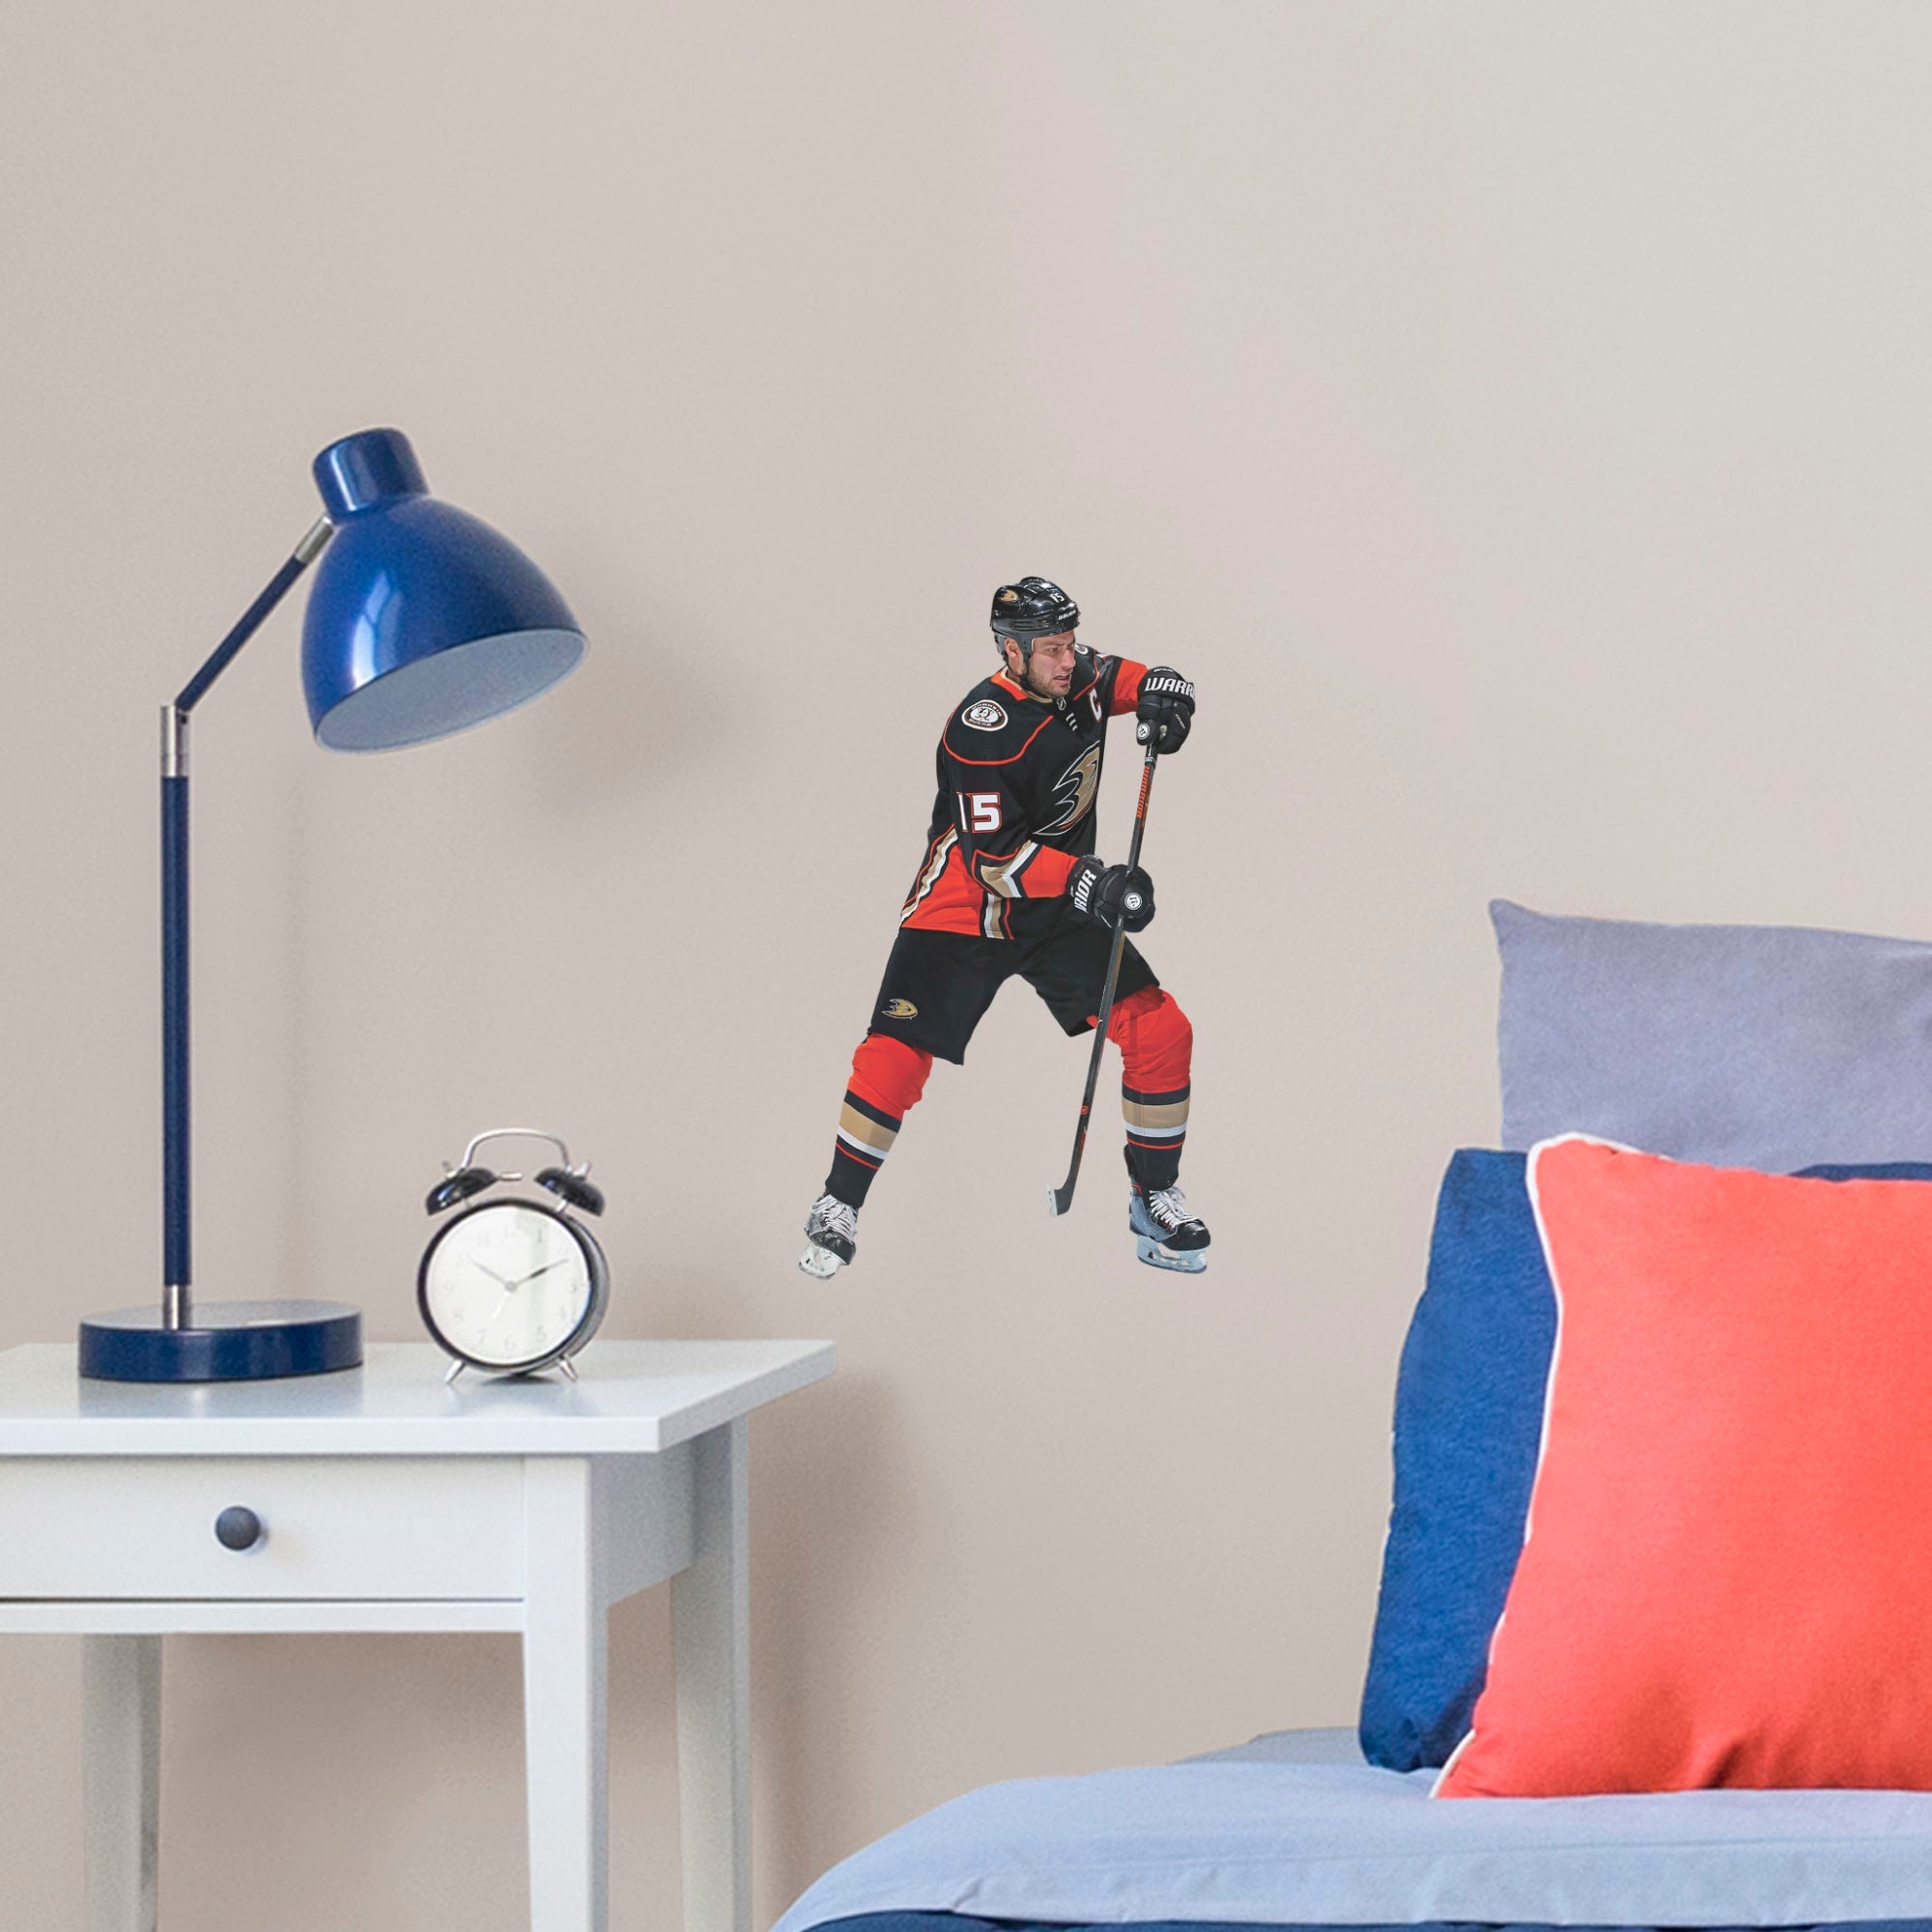 Ryan Getzlaf for Anaheim Ducks - Officially Licensed NHL Removable Wall Decal Large by Fathead | Vinyl